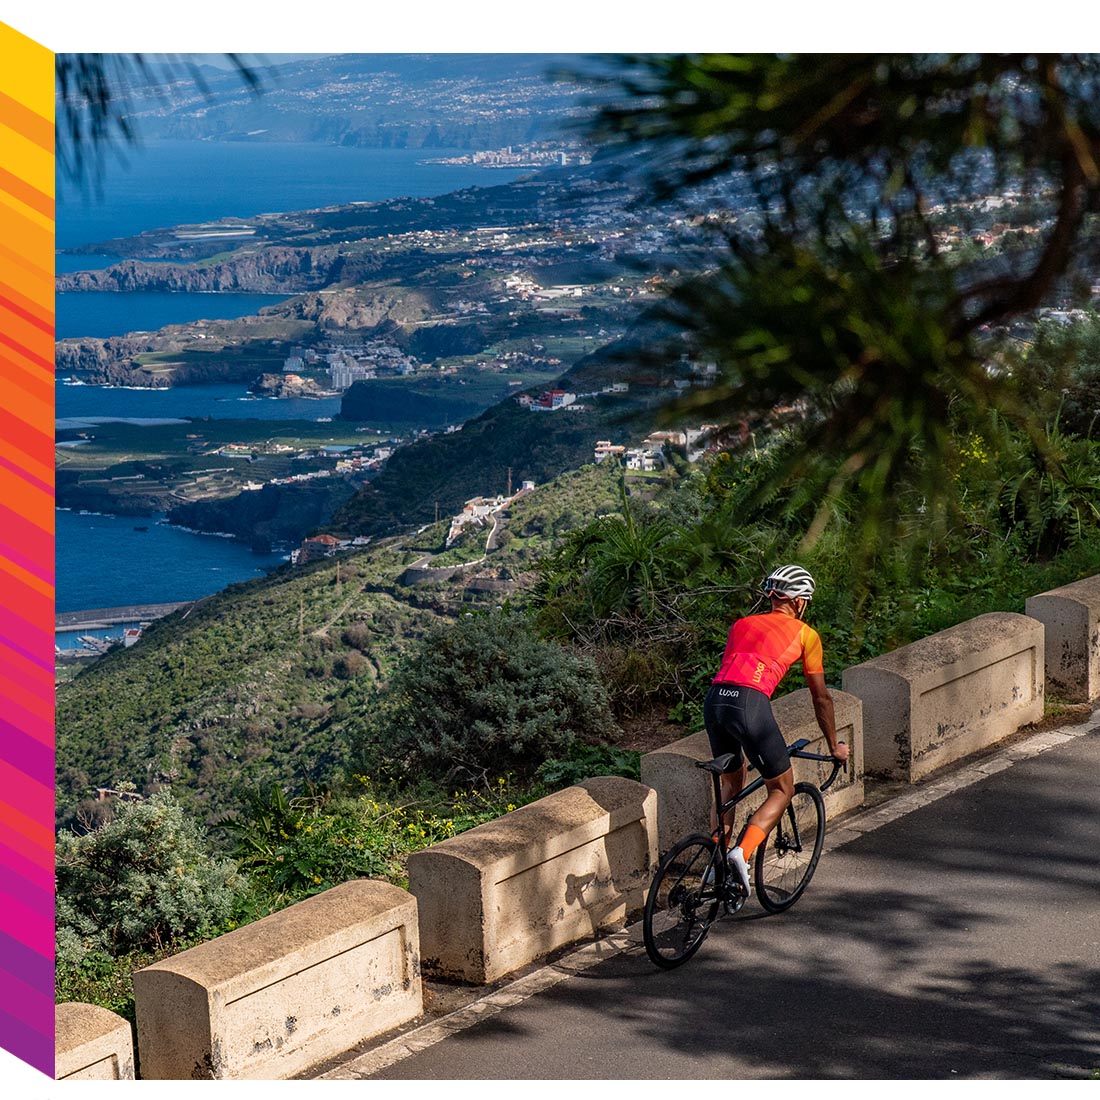 road cyclists wear Luxa Magnetico jersey from 2023 spring / summer collection and ocean with Garachico town is in the background